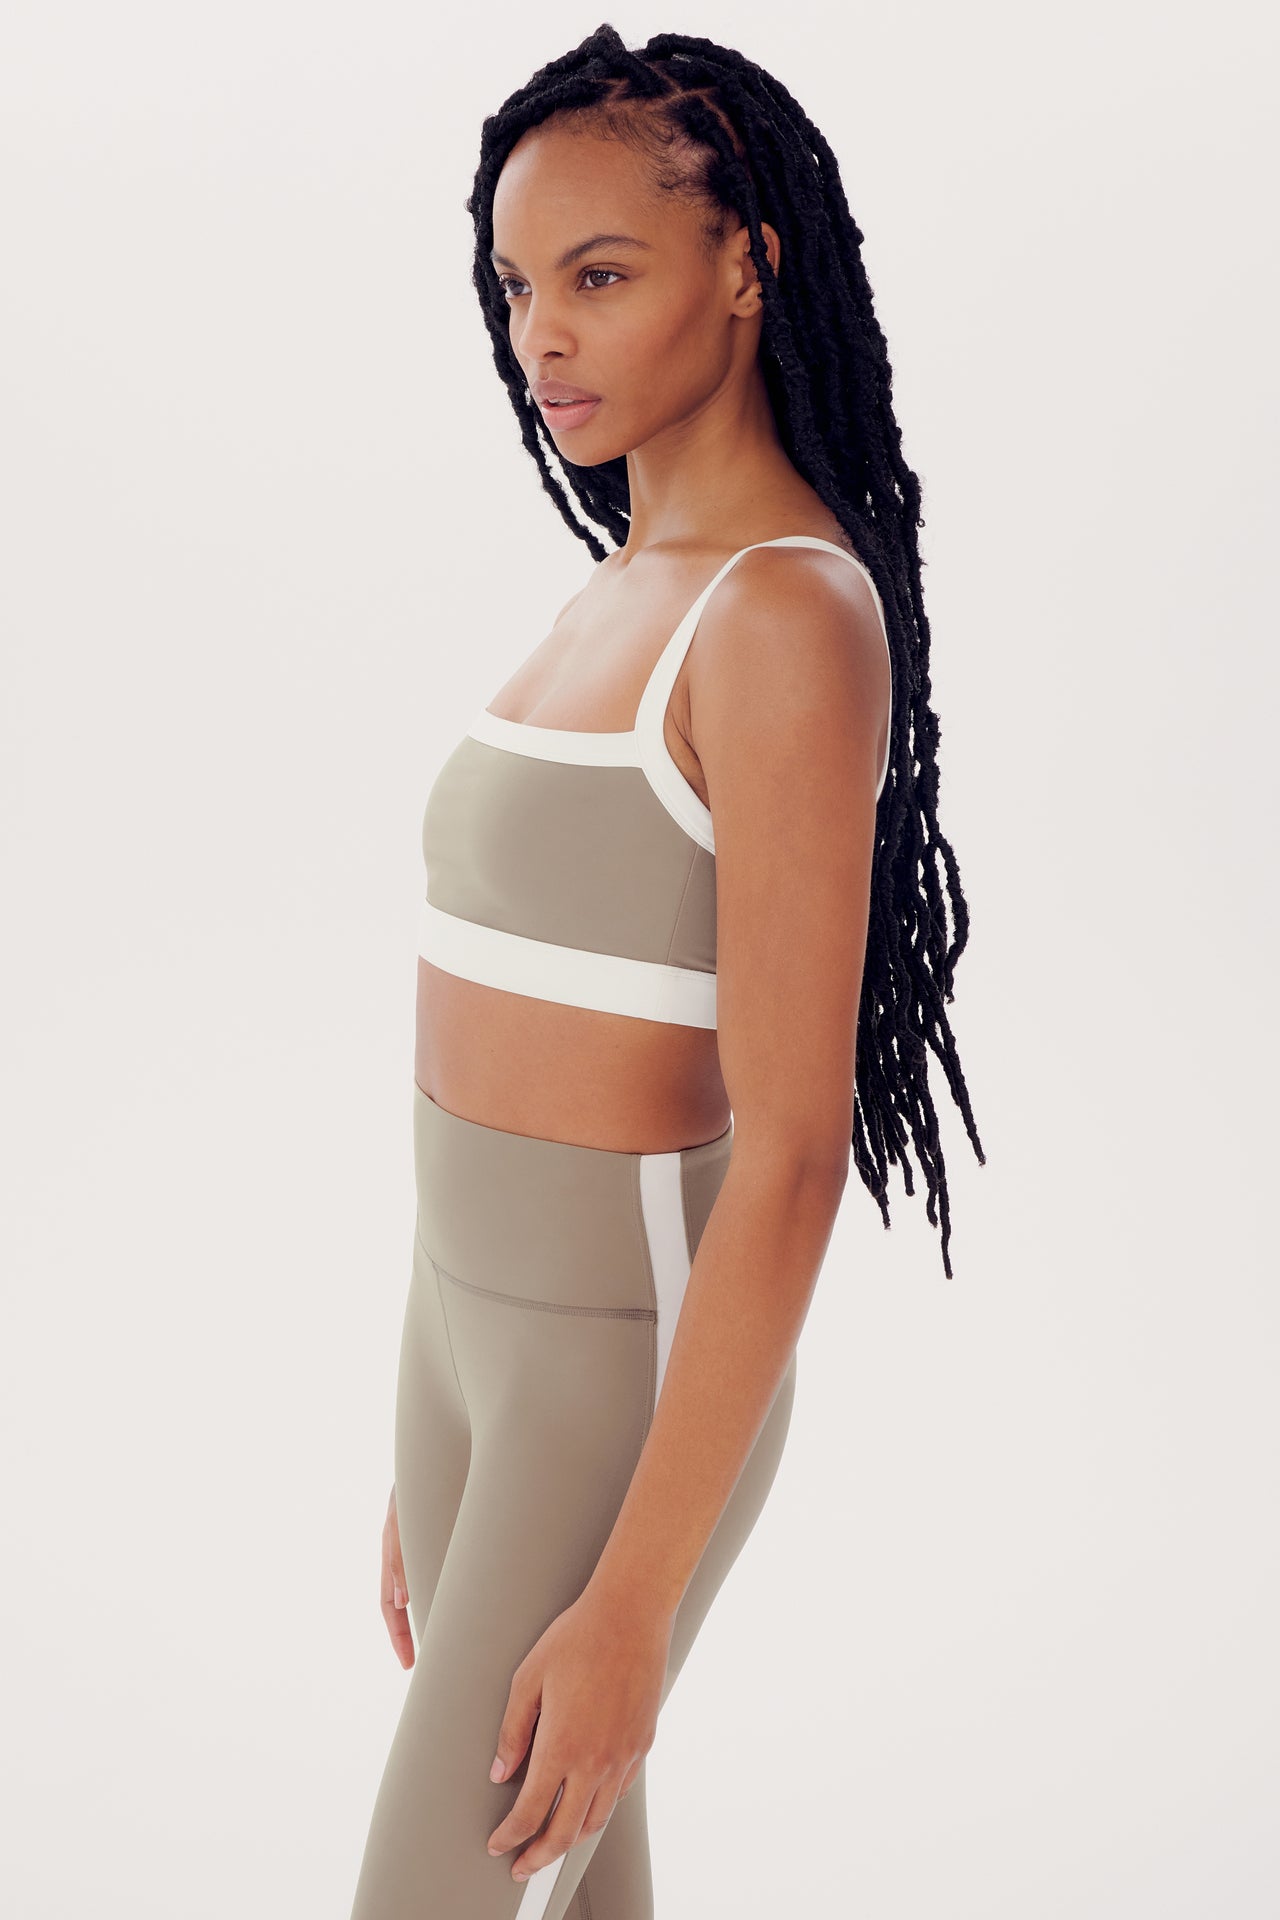 A woman with long braided hair wearing a SPLITS59 Monah Rigor Bra in Latte/White and leggings stands in a profile pose against a white background.